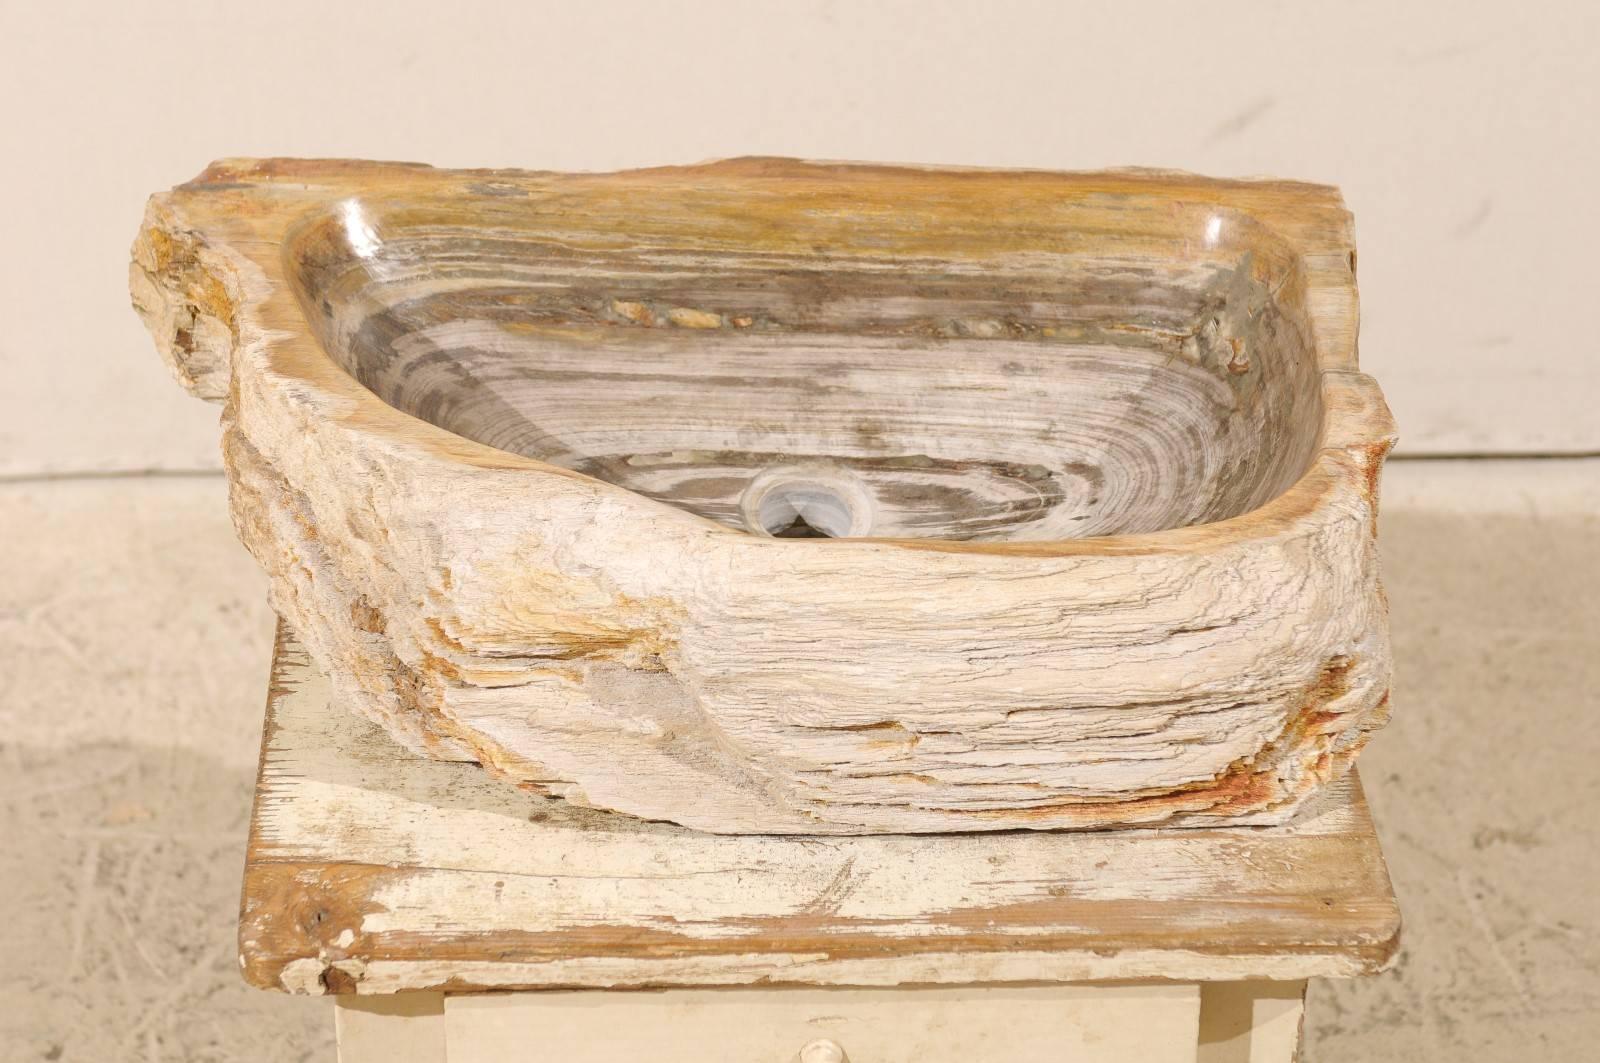 A petrified and polished wood sink of oblong shape. Petrified wood is a fossil that becomes so sturdy and dense that it is as heavy as marble. This petrified wood sink is an overall neutral light cream color with grey and beige tones throughout.